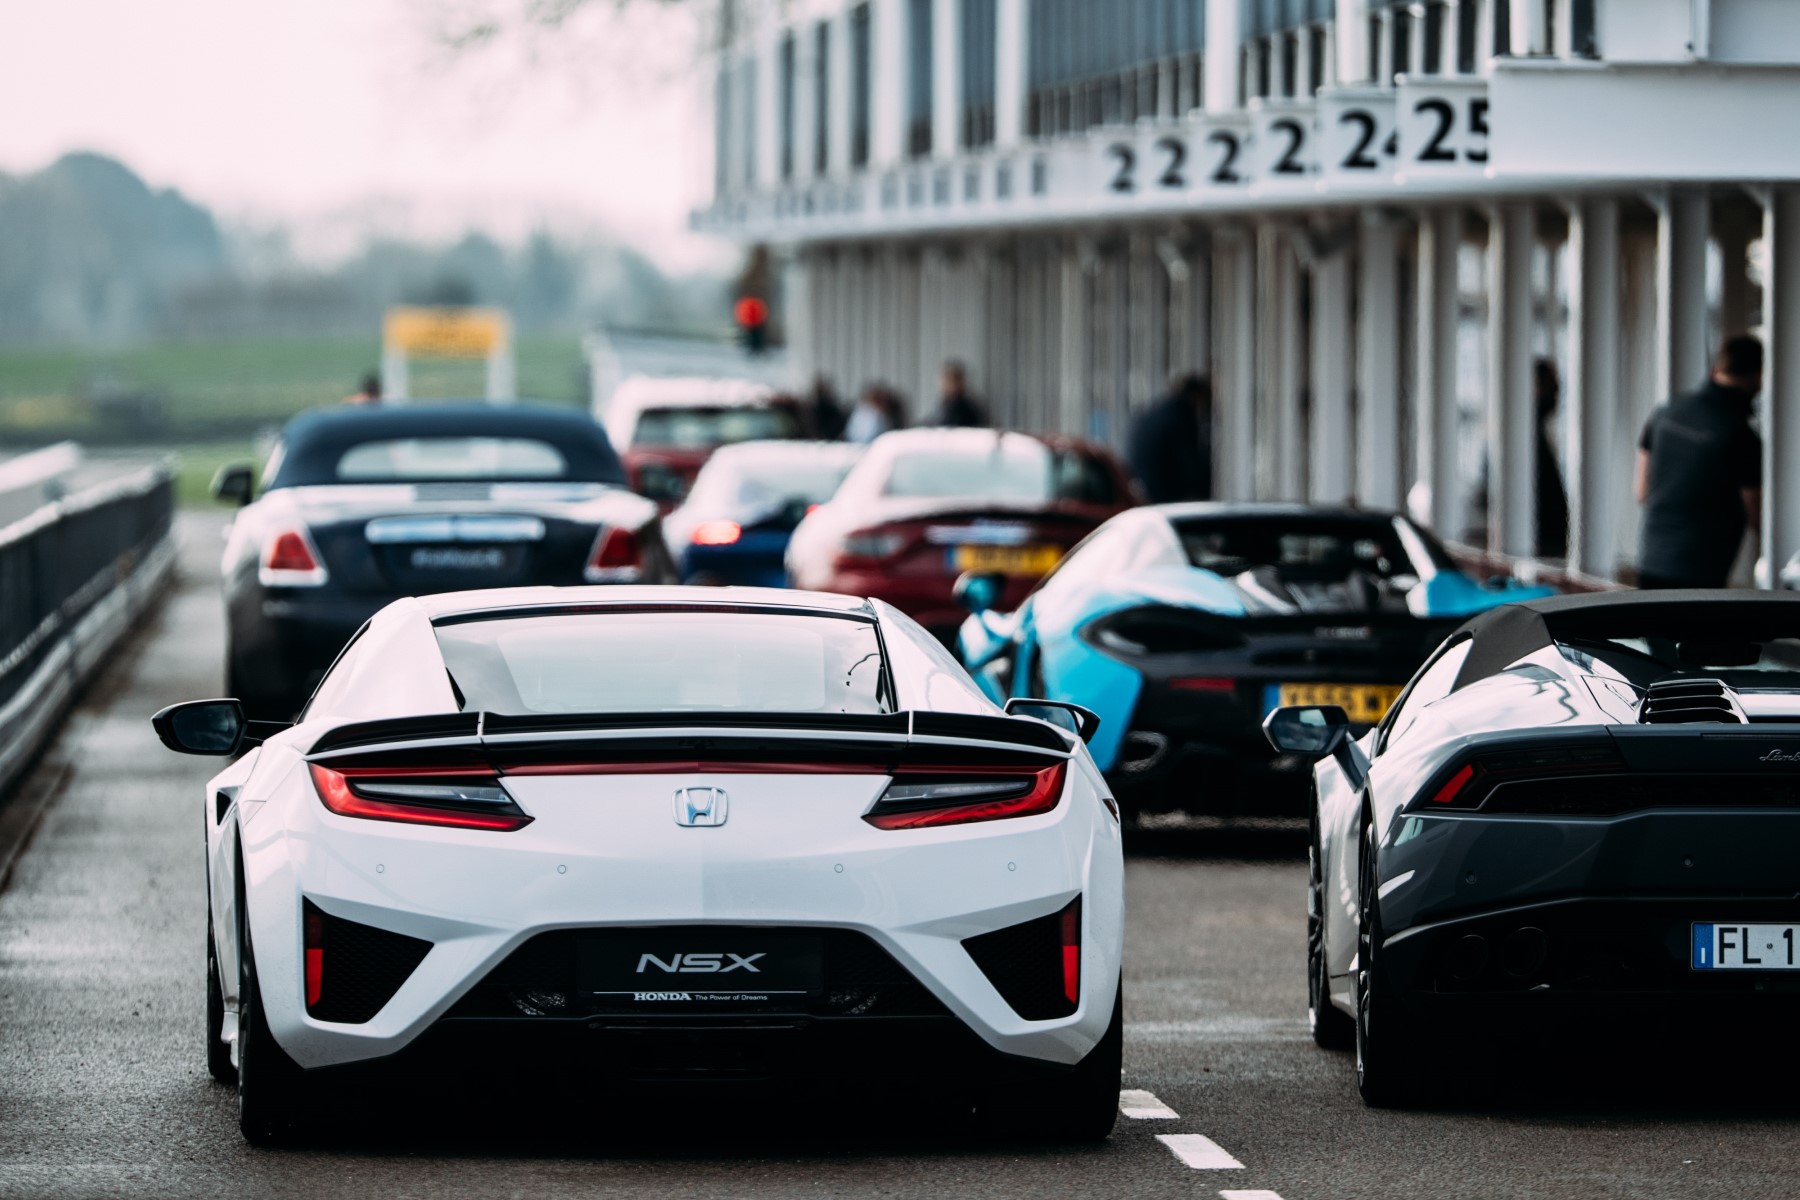 Exclusive Goodwood drive day – the highlights